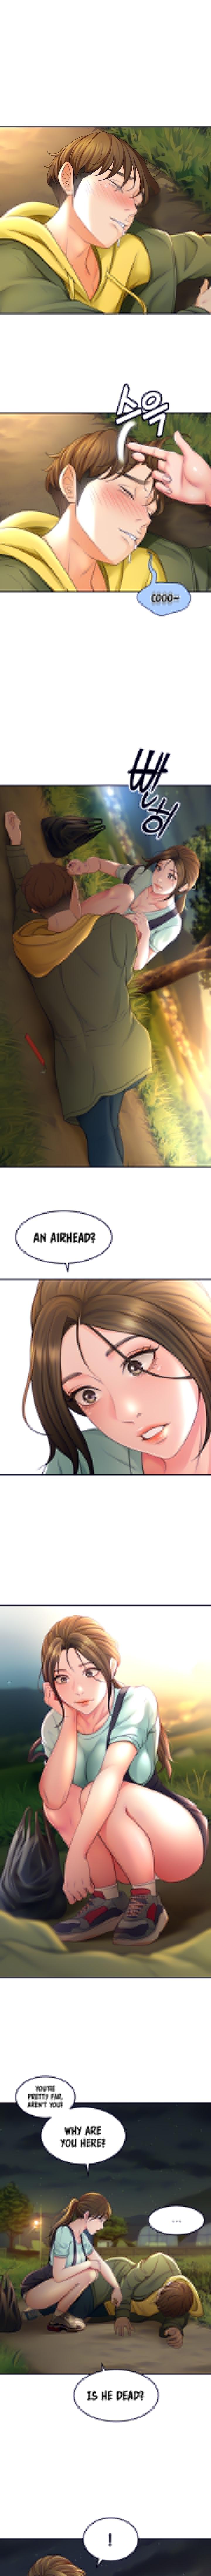 Role Play She is Working Out [Kim Mundo, MAD, YangYang] Ch.10? [English] [Manhwa PDF] Slapping - Page 9